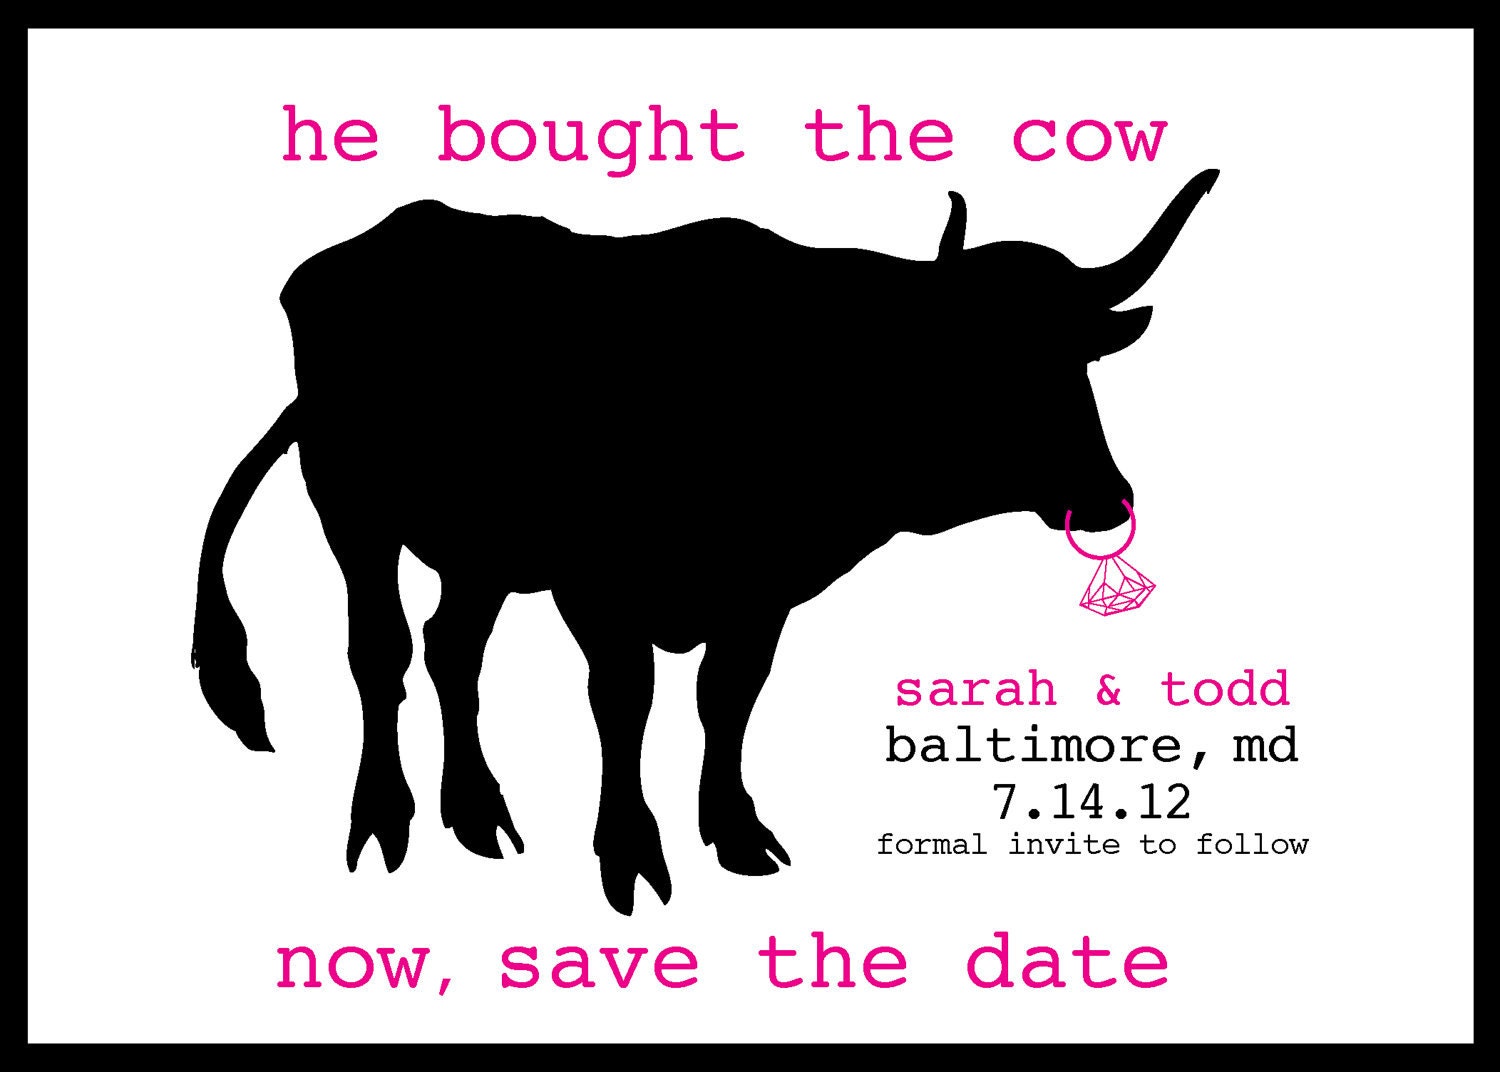 Funny Save-the-Date Cards for Couples With a Sense of Humor